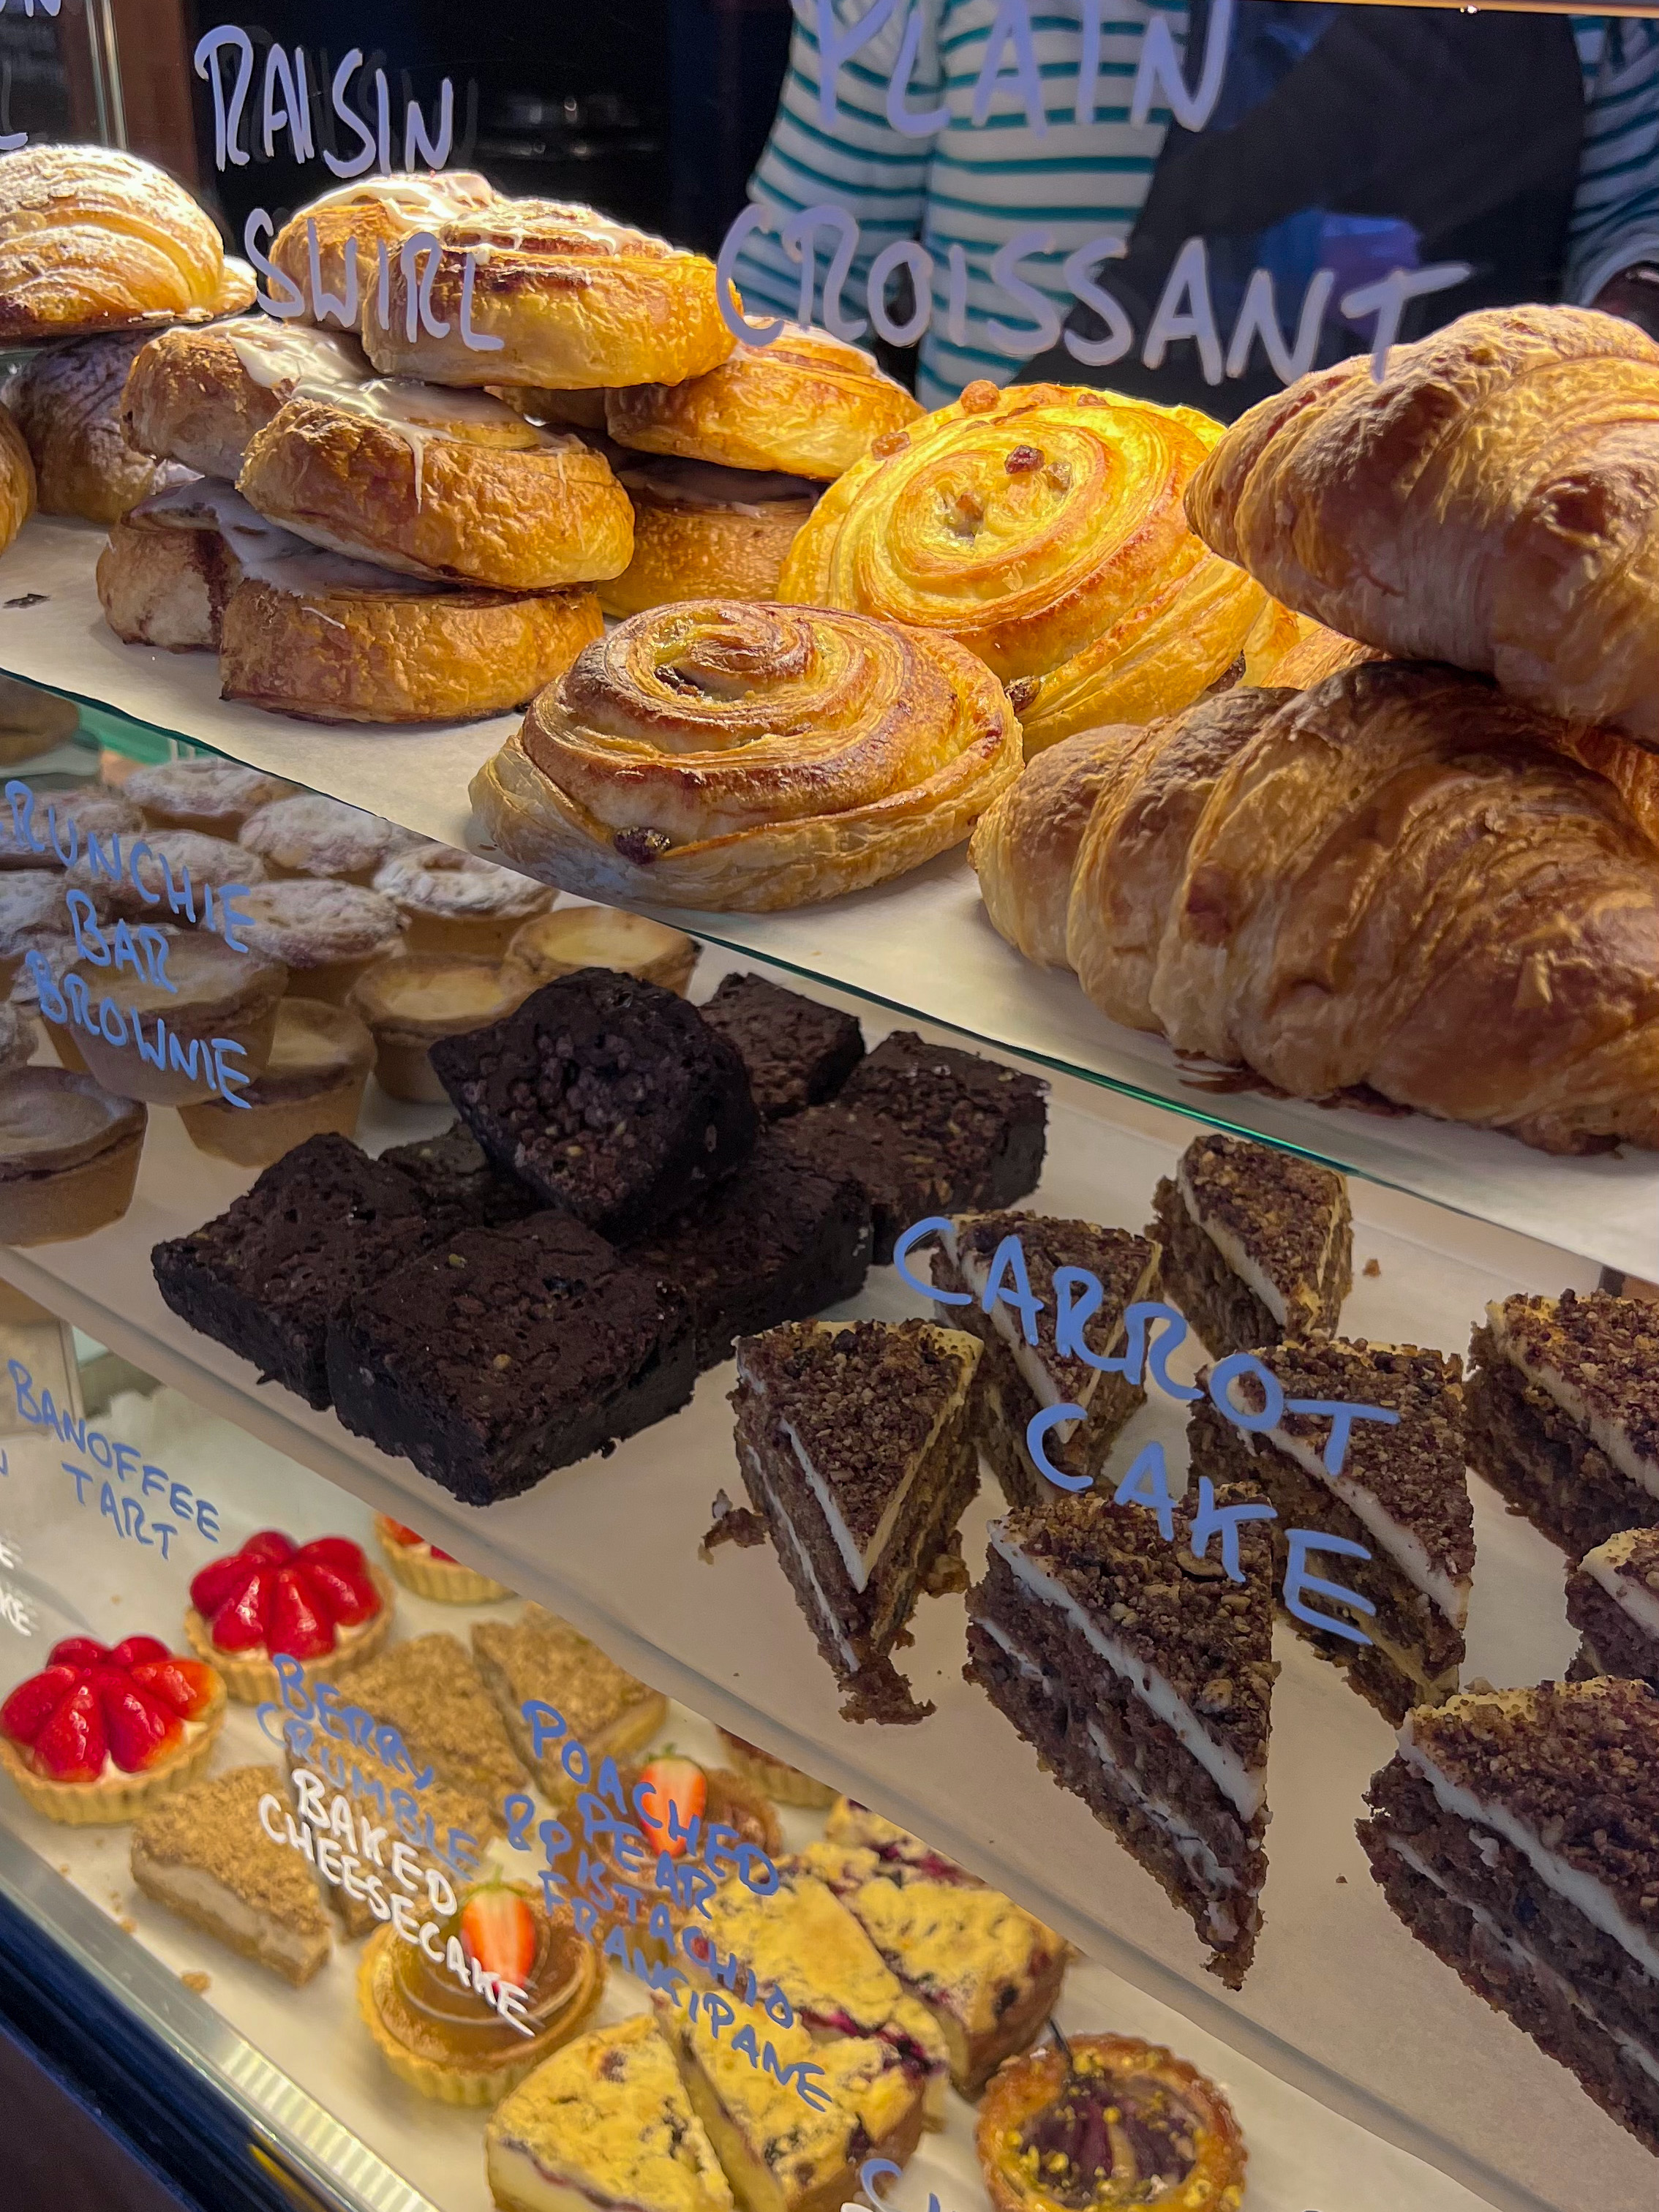 Sweet treats and pastries on display at Manna House Bakery